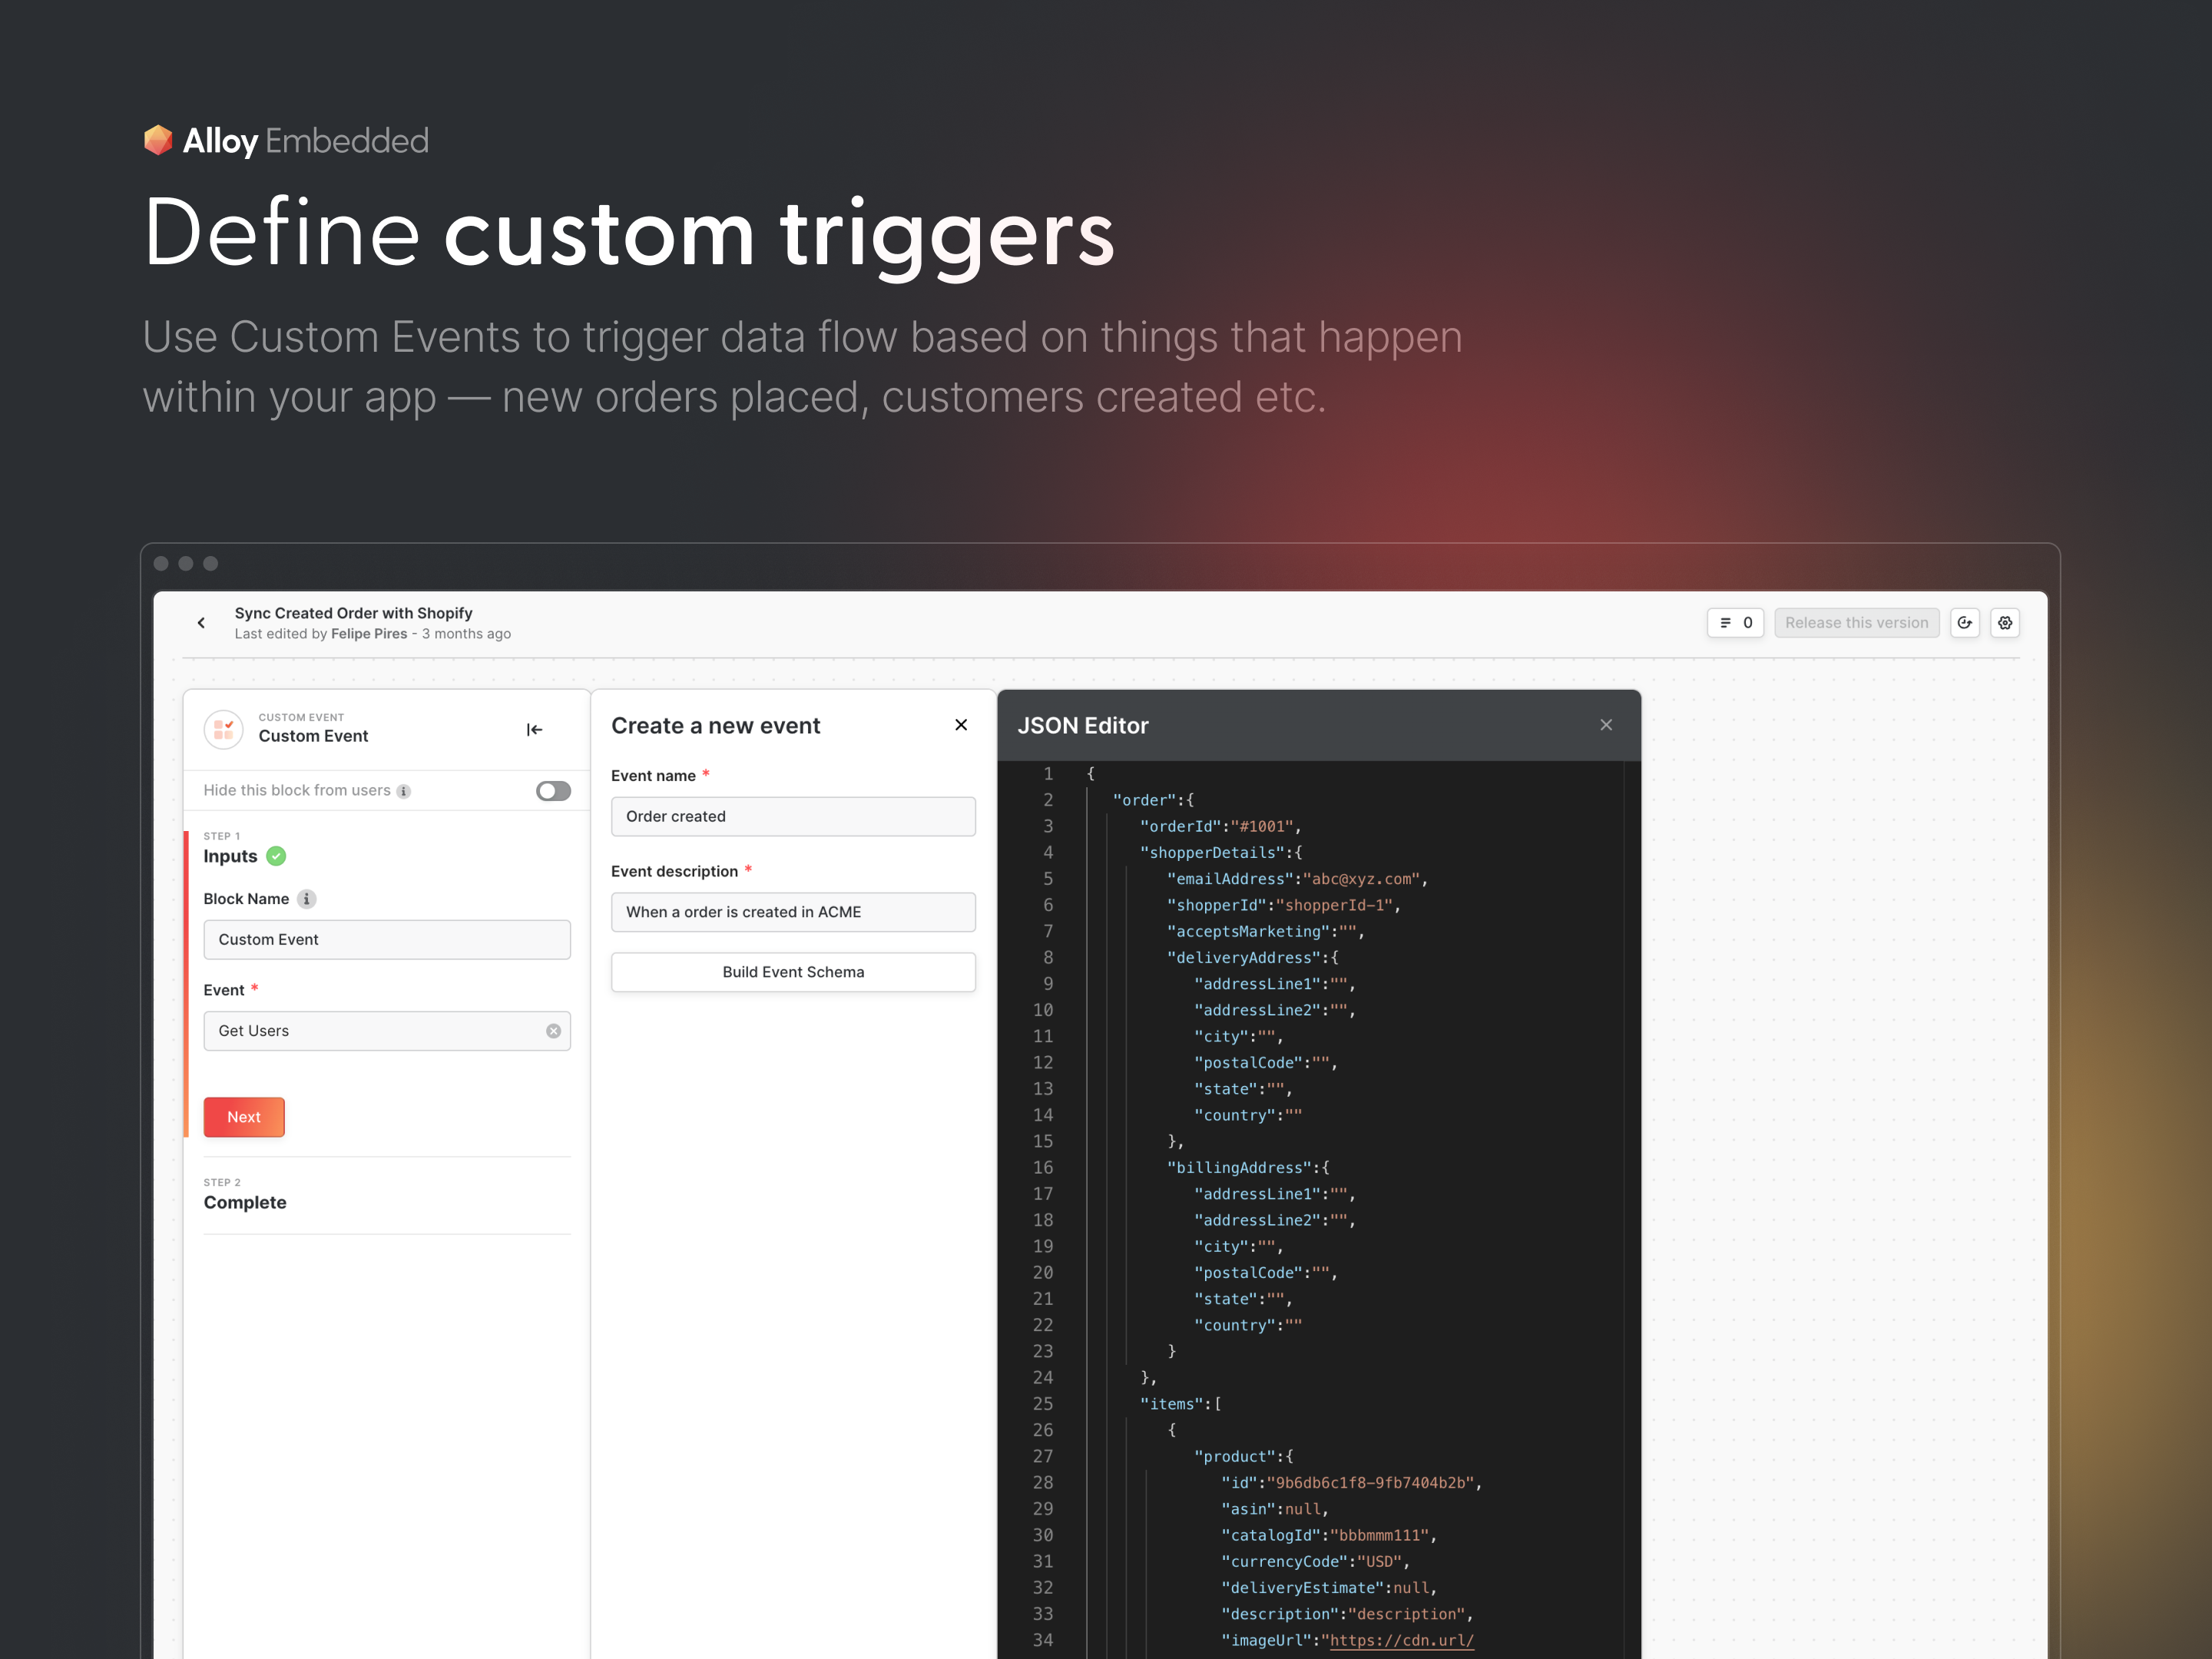 Use Custom Events to trigger data flow based on things that happen within your app — new orders placed, customers created etc.